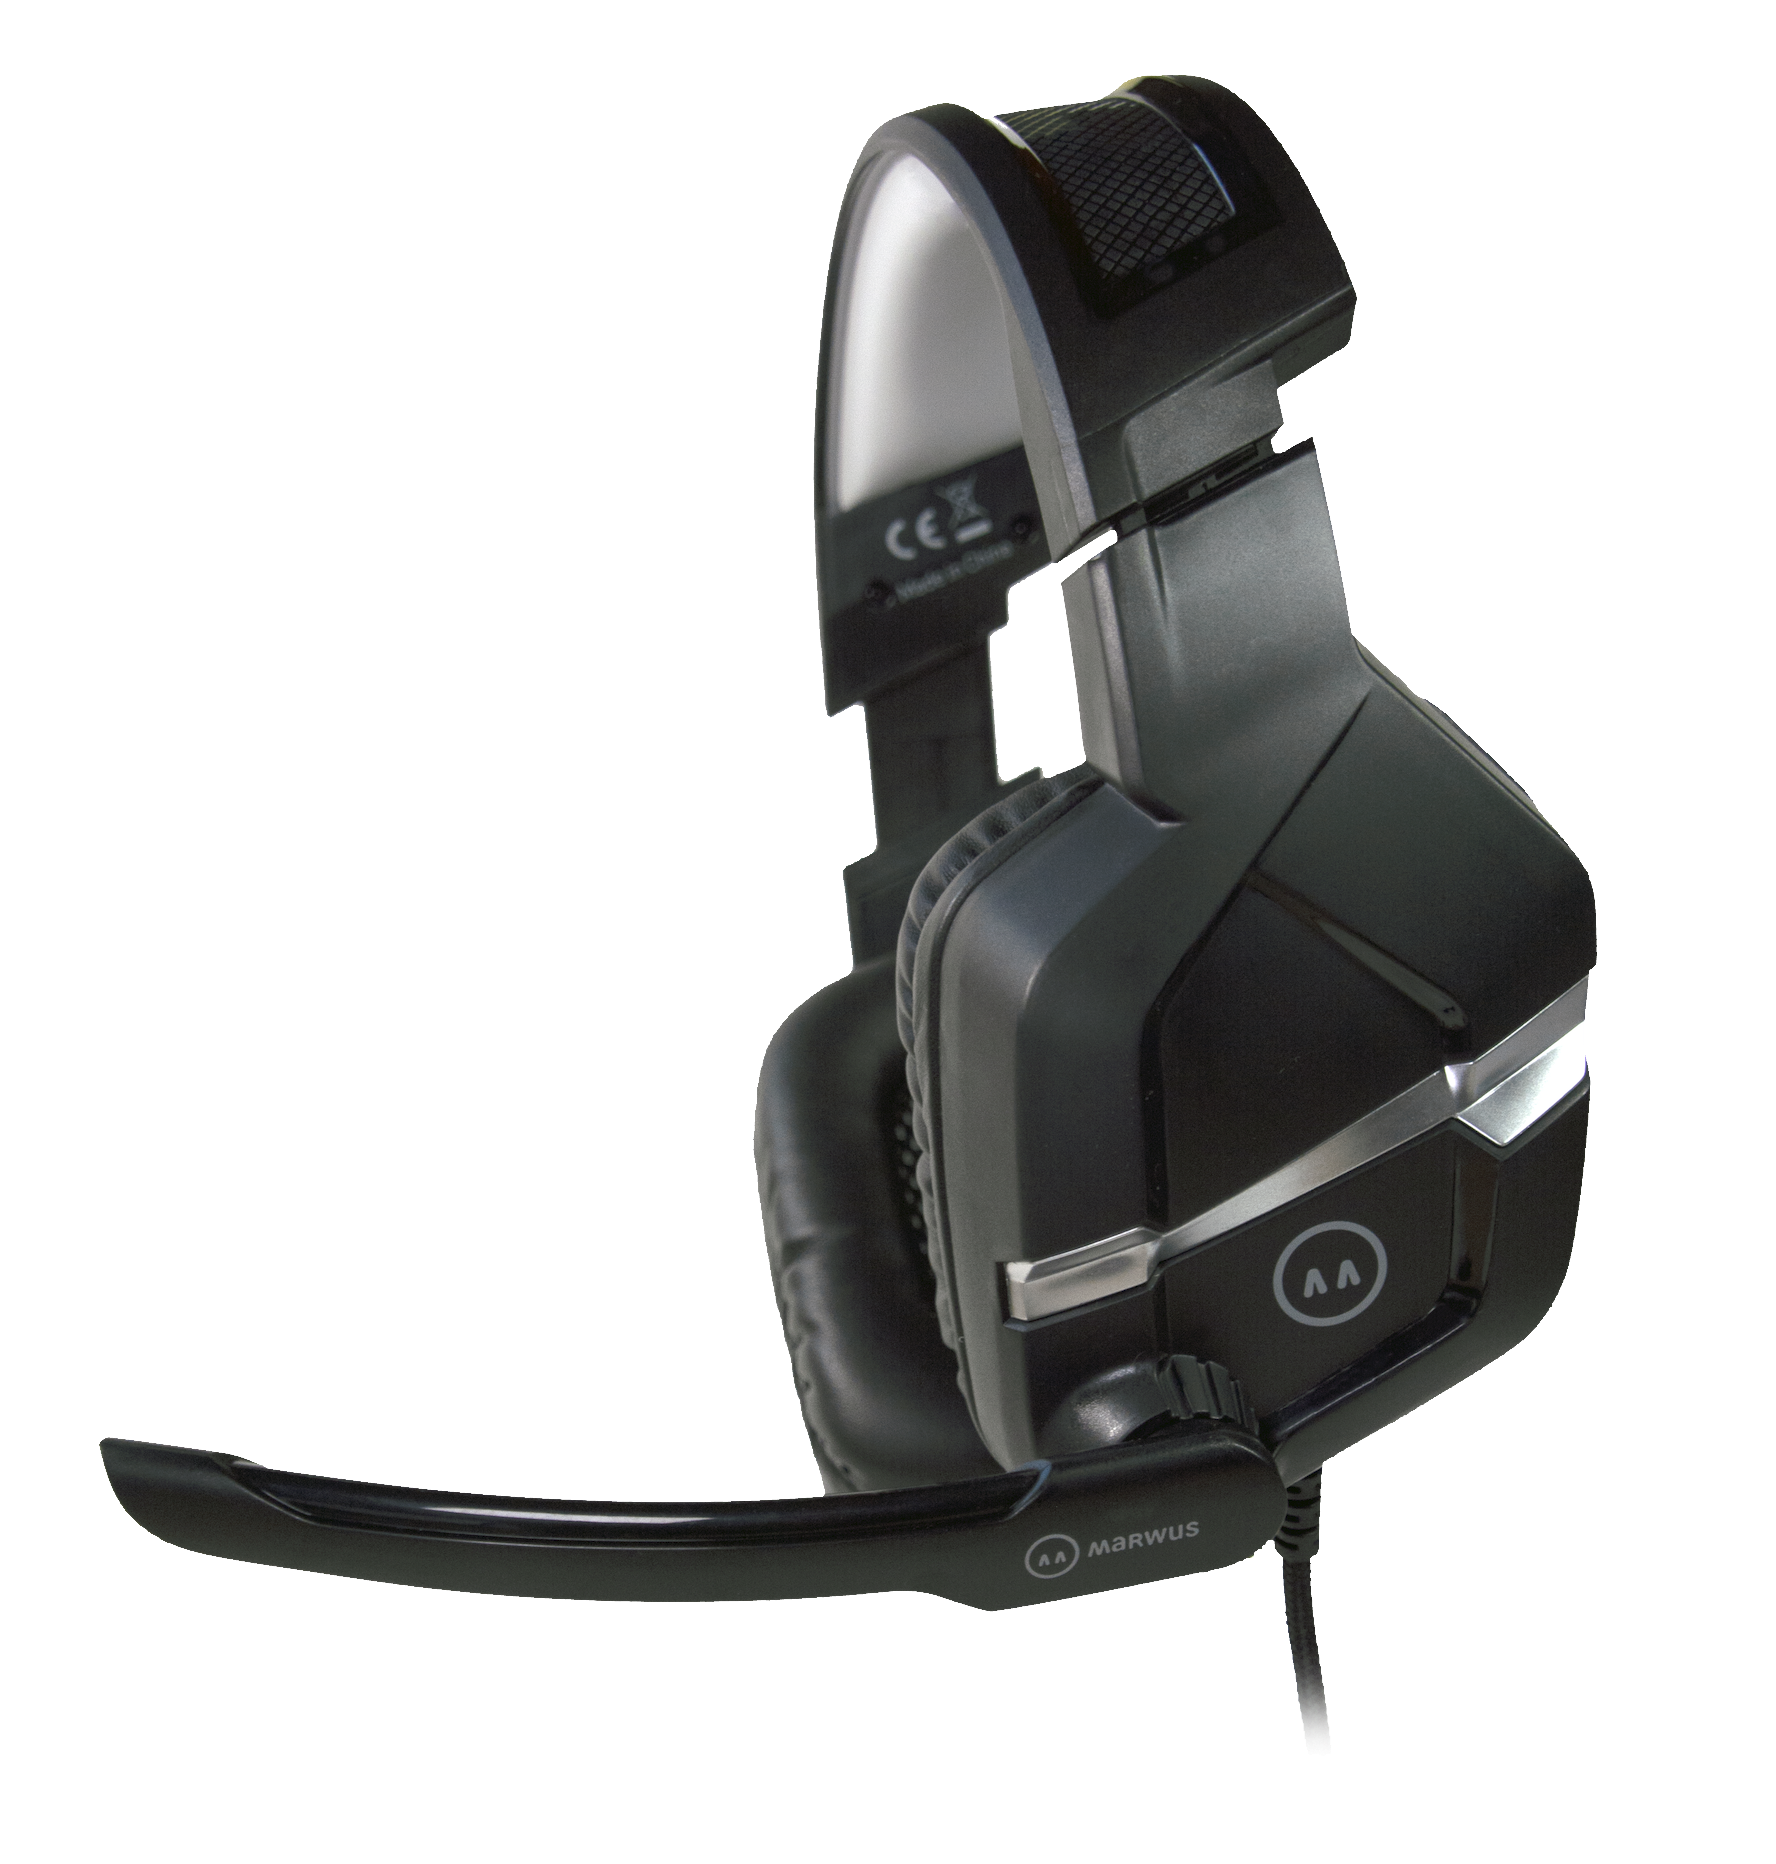 Marwus GH602 stereo headset product image